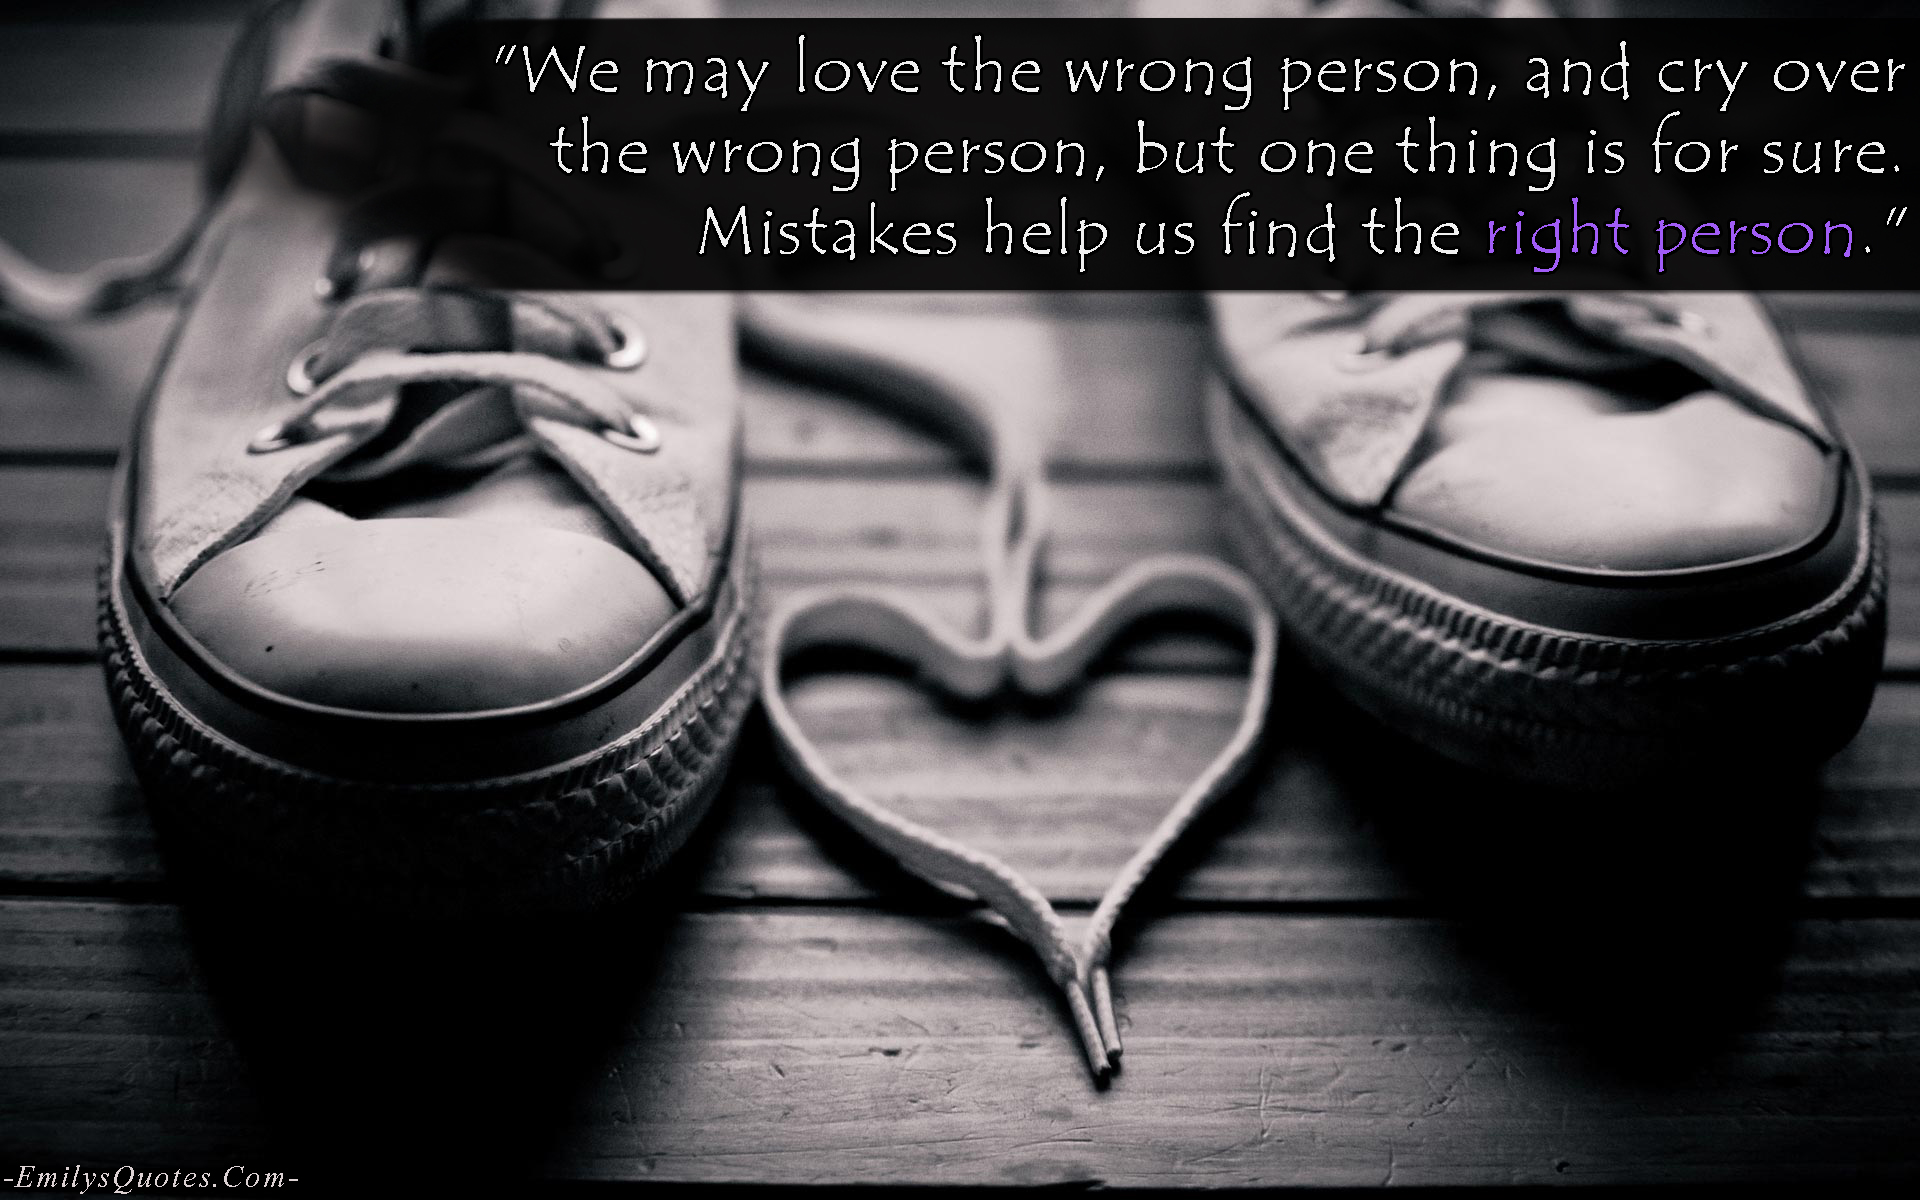 We may love the wrong person, and cry over the wrong person, but one thing is for sure. Mistakes help us find the right person